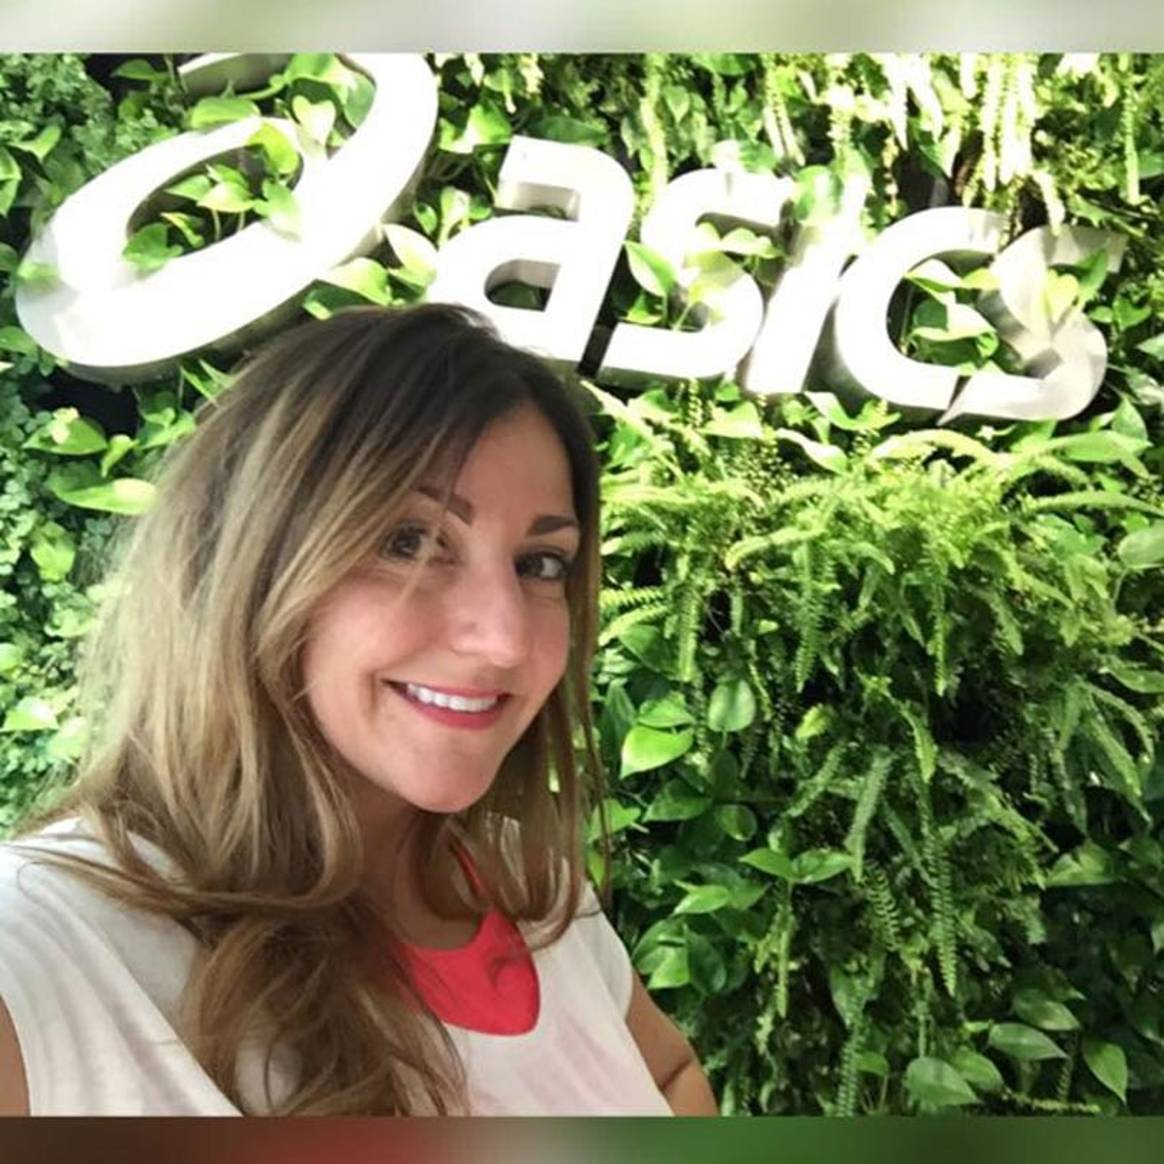 Interview: Sophie Akben, Area Manager at ASICS UK